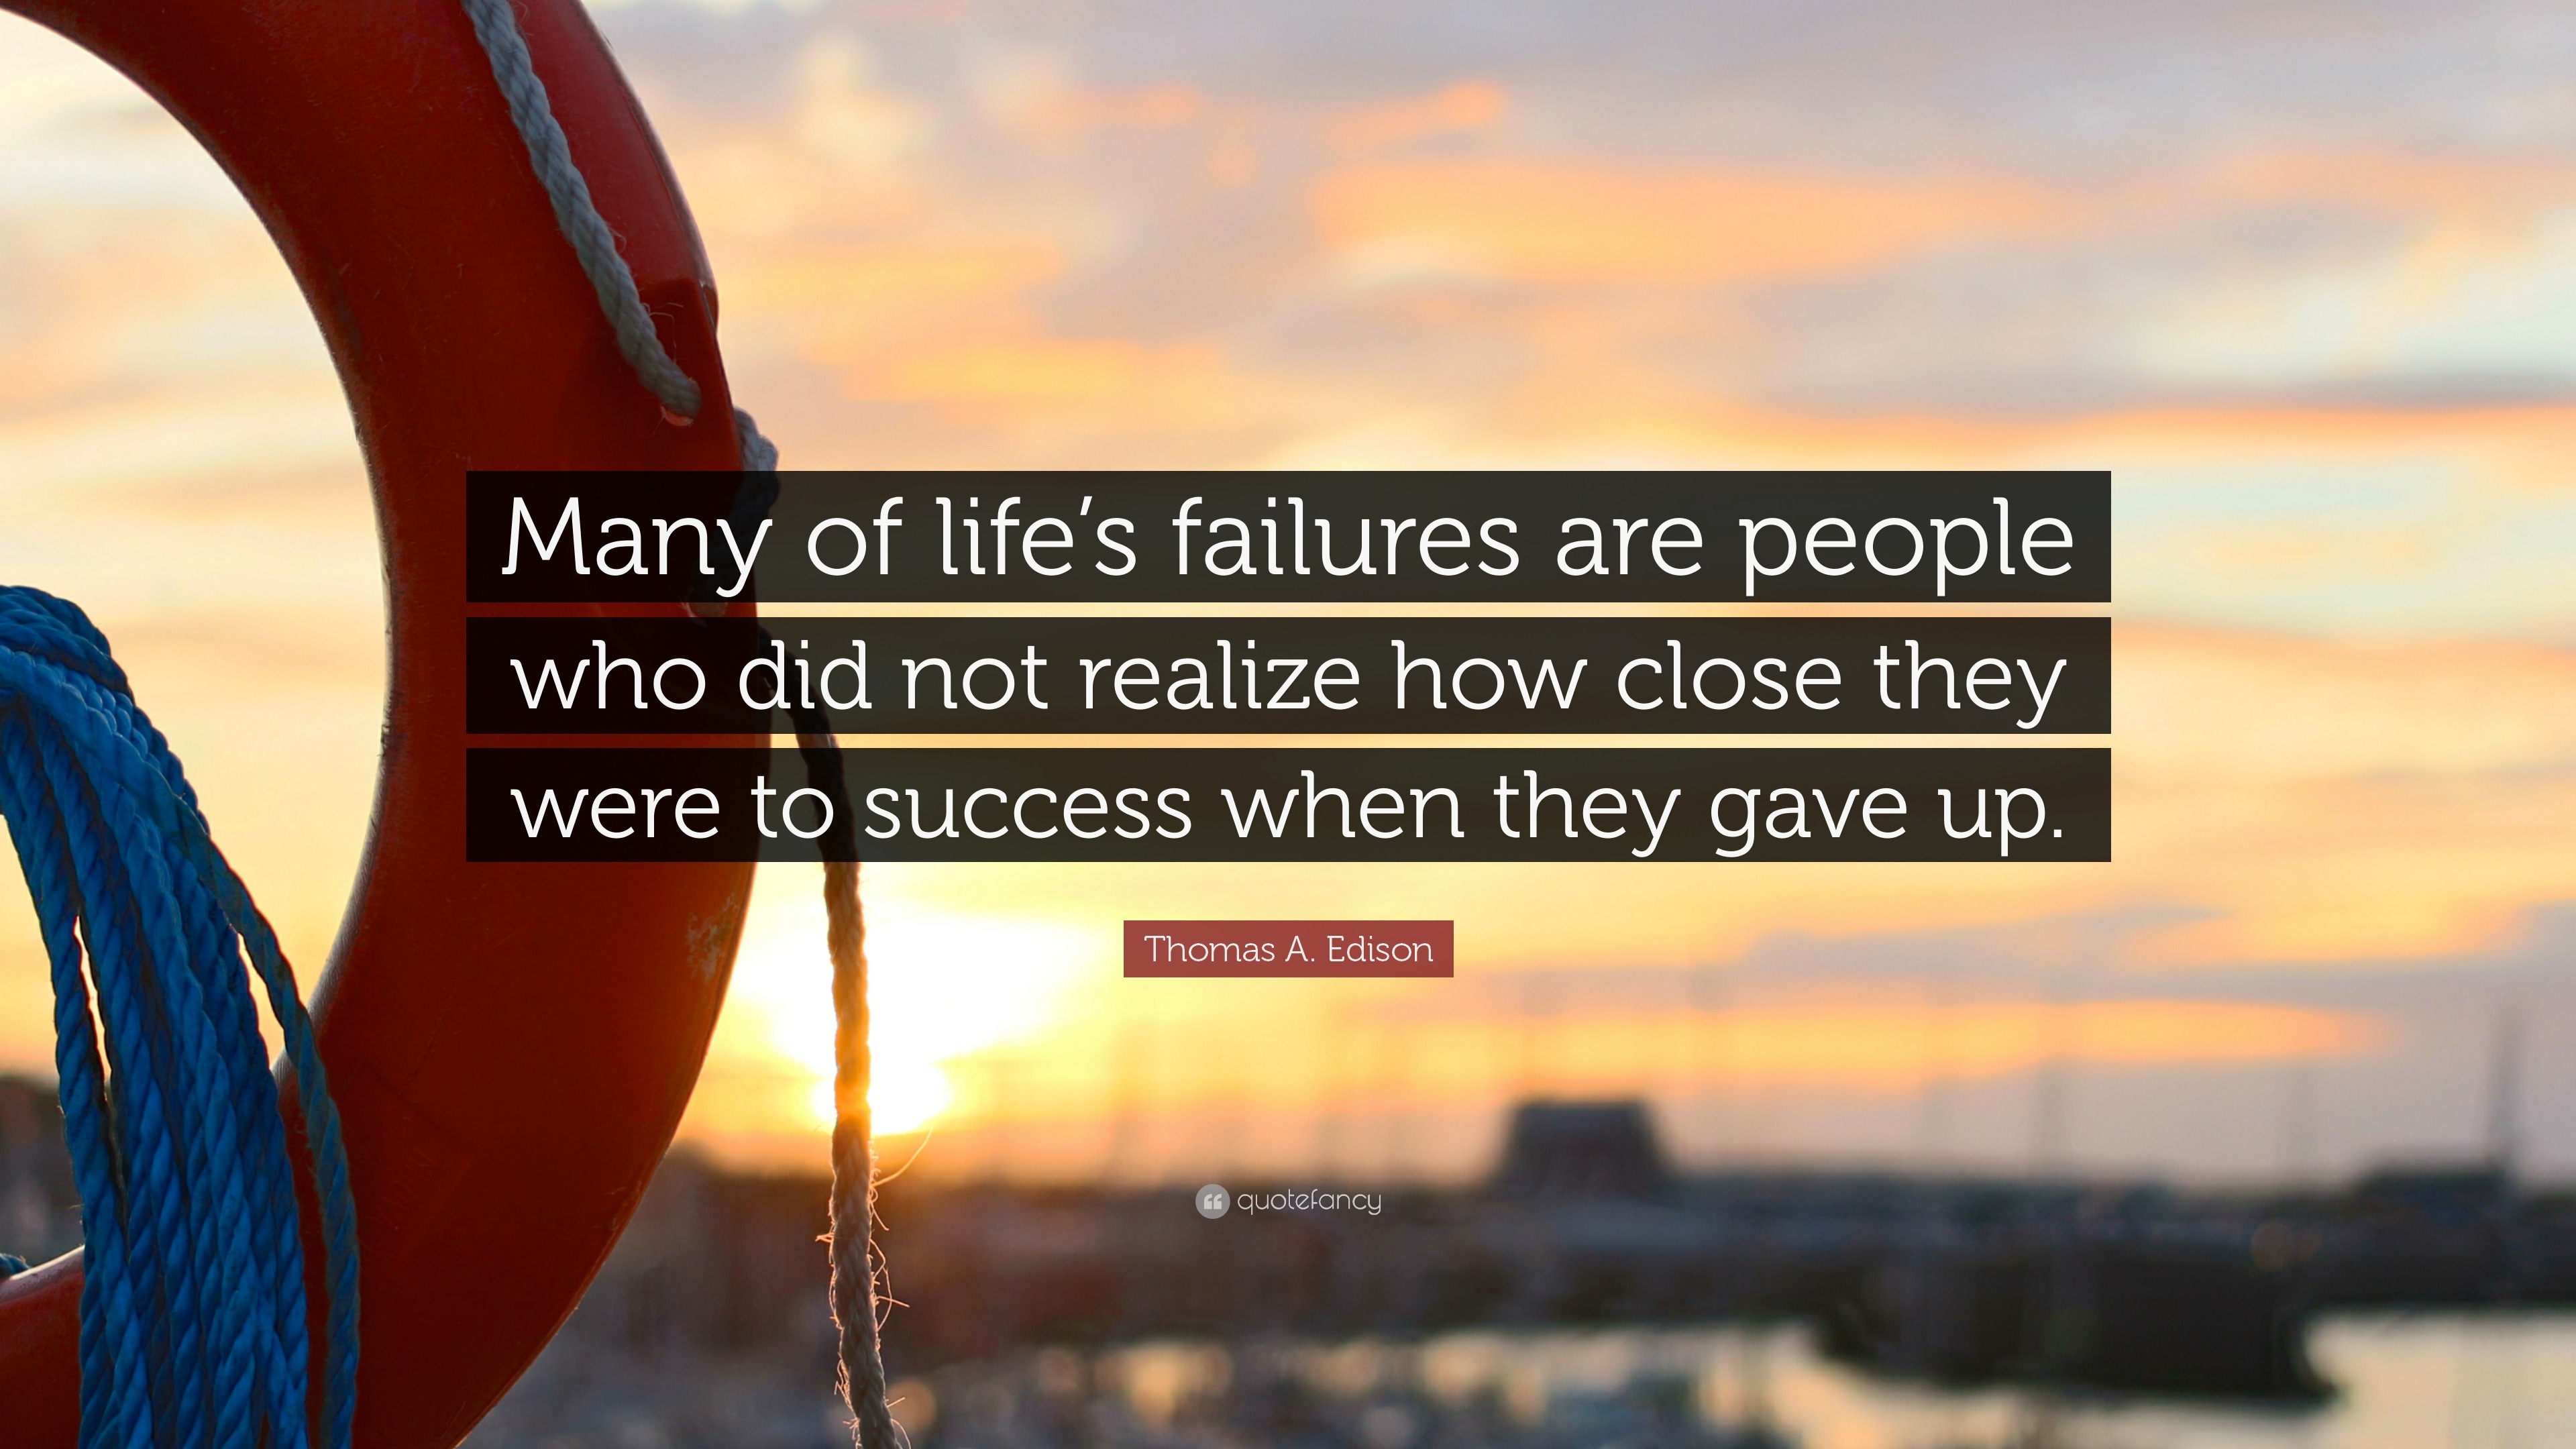 Positive Quotes “Many of life s failures are people who did not realize how close